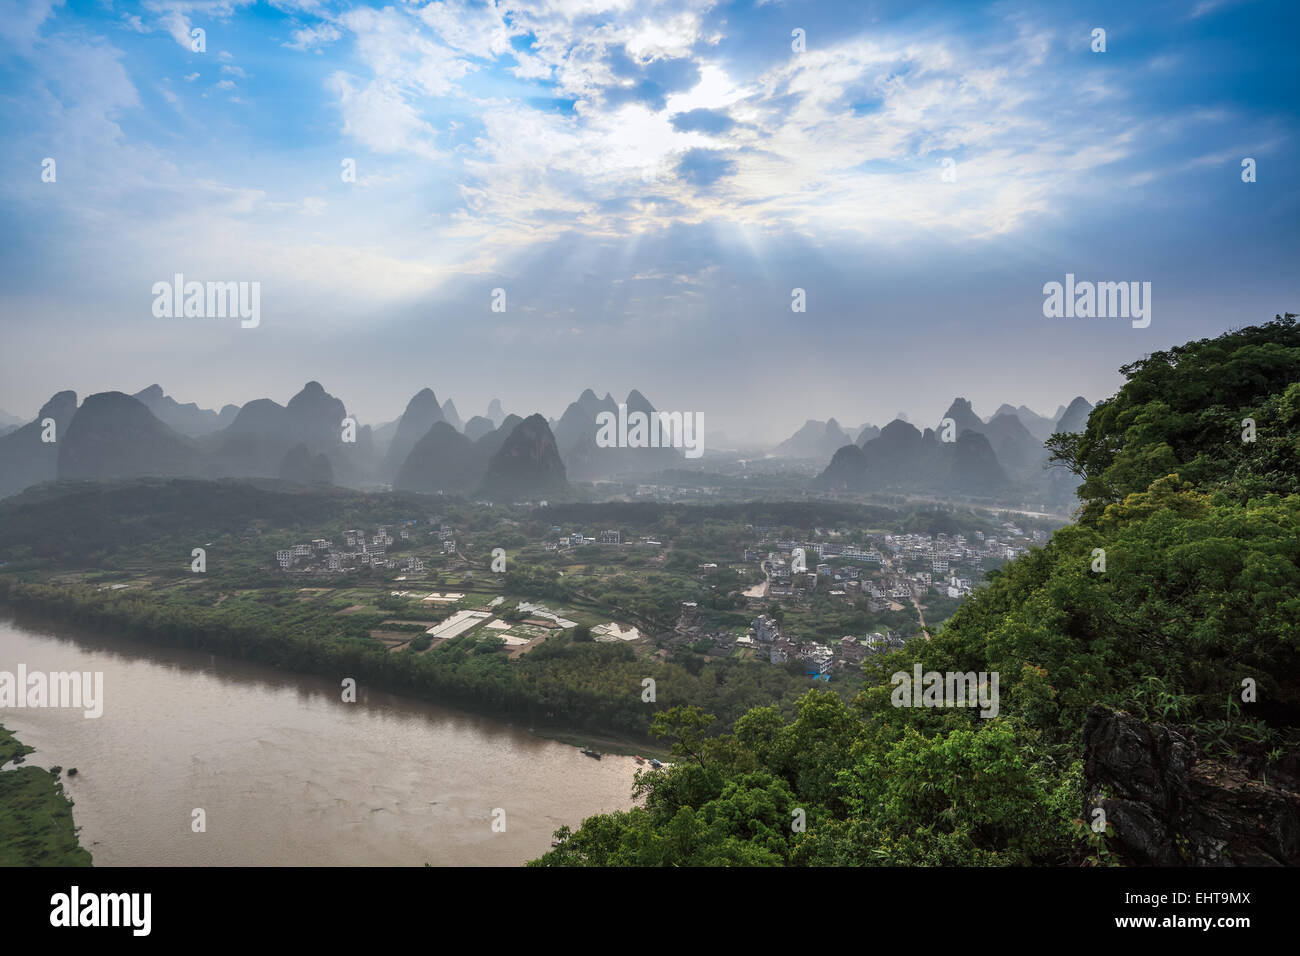 karst mountain landscape with sunlight through the clouds Stock Photo